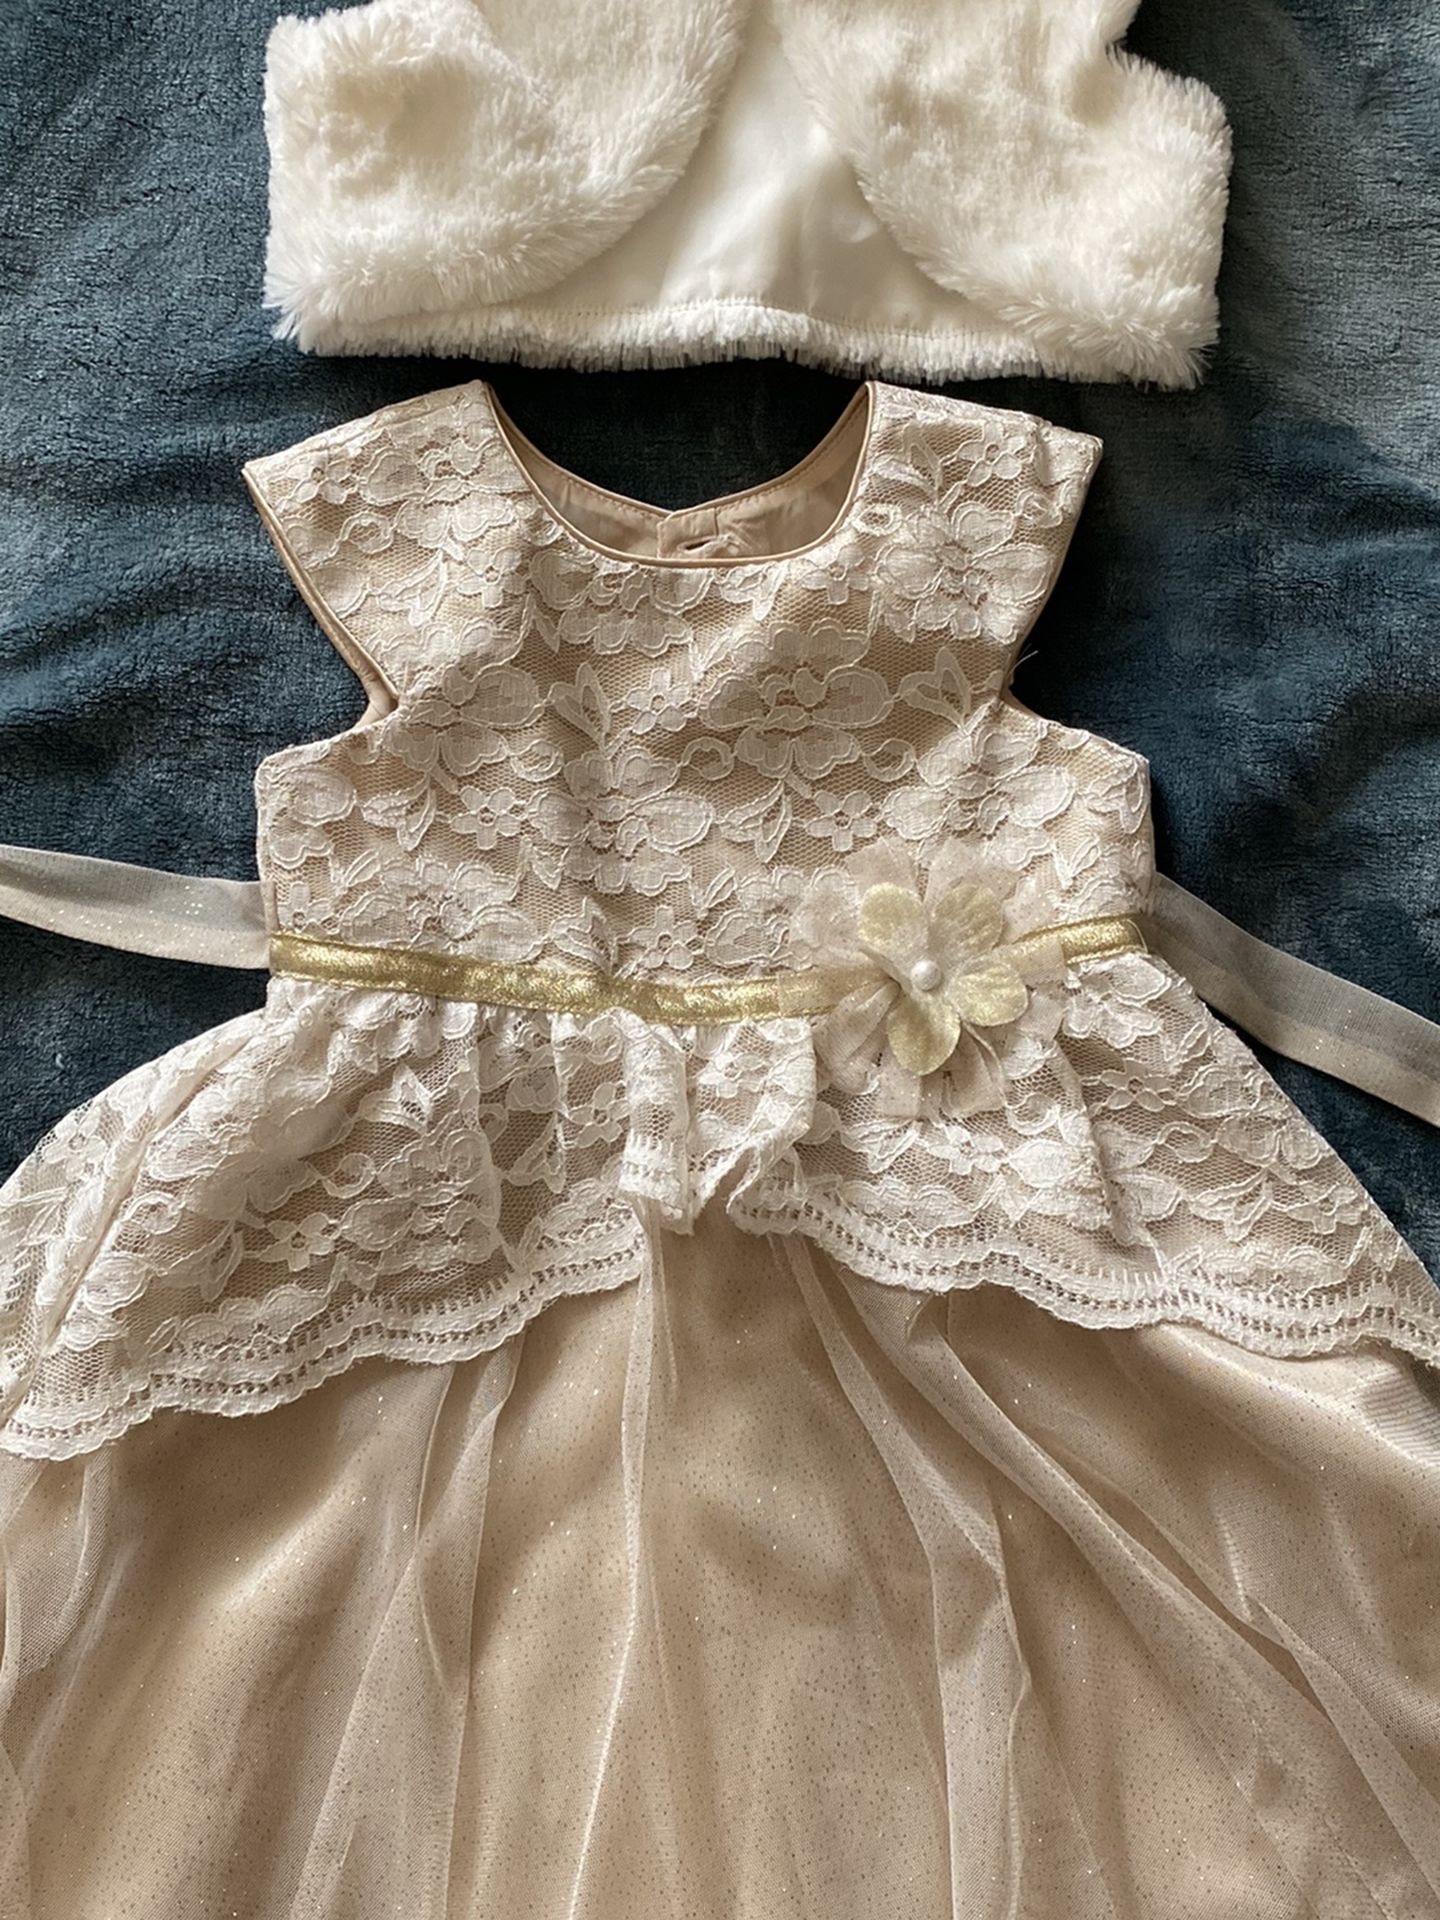 Girls Holiday Dress And Faux fur Vest, 4 Yrs Old